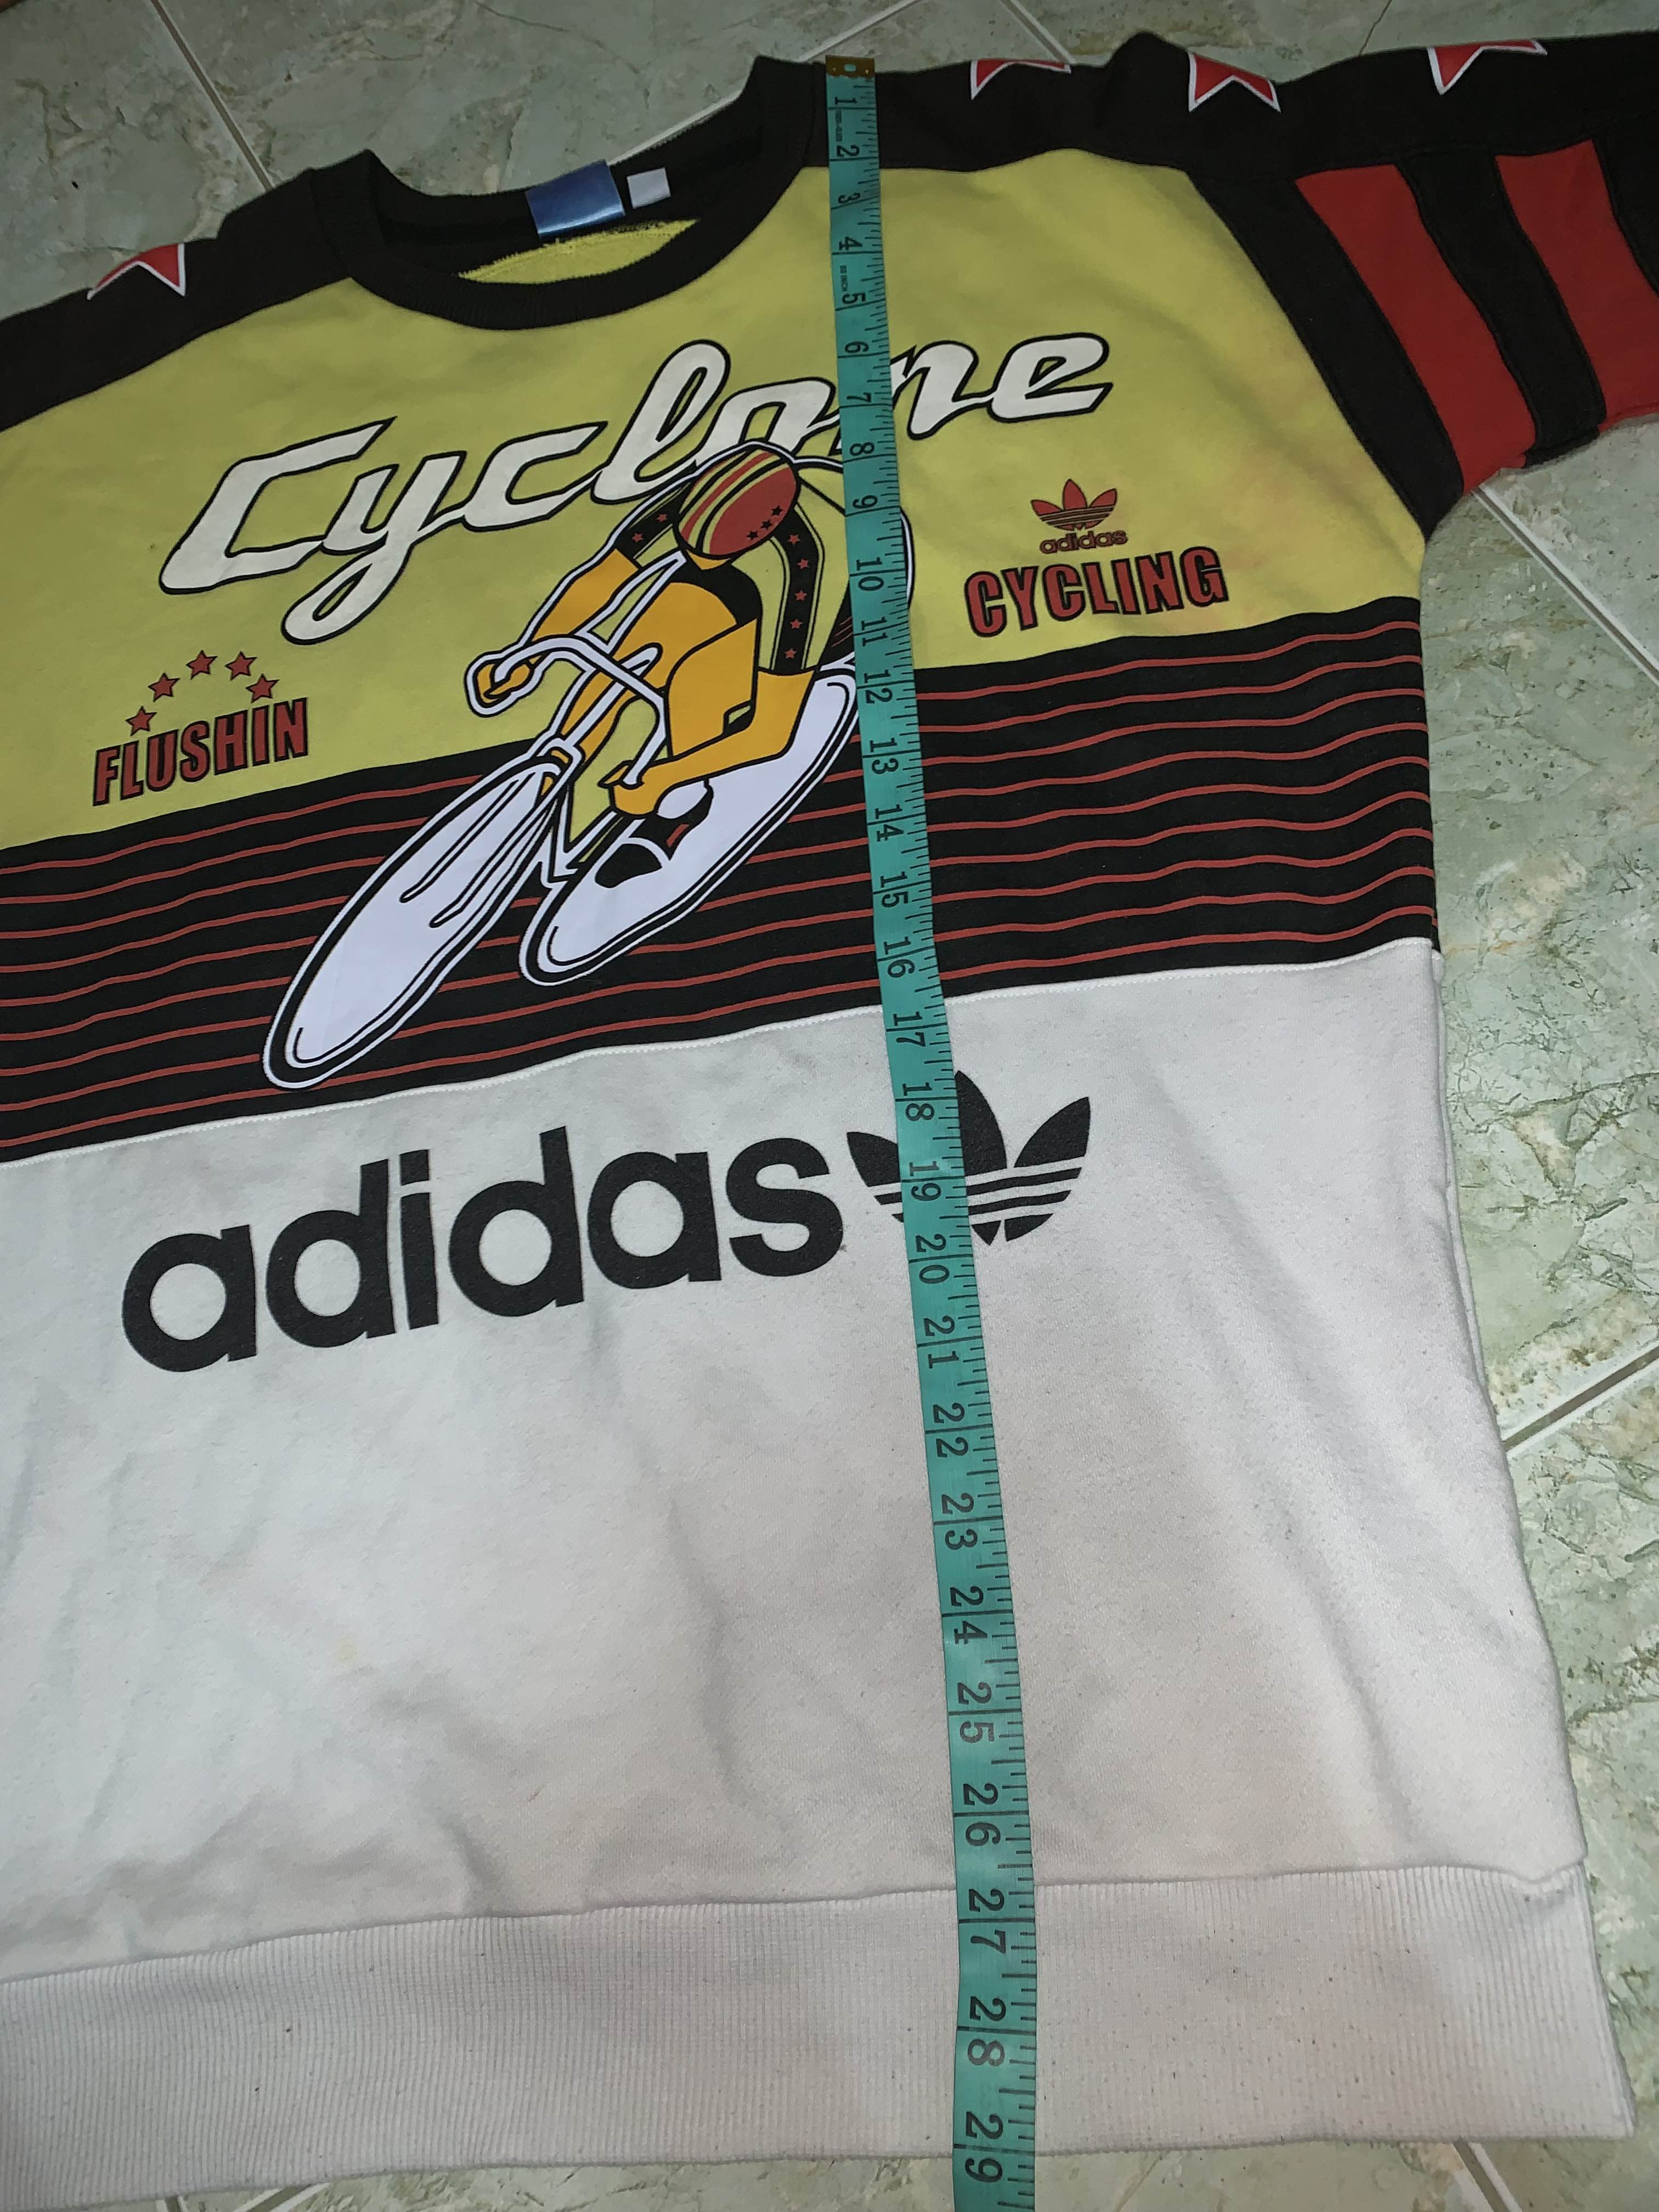 Adidas CYCLONE PullOver sweaters - 6